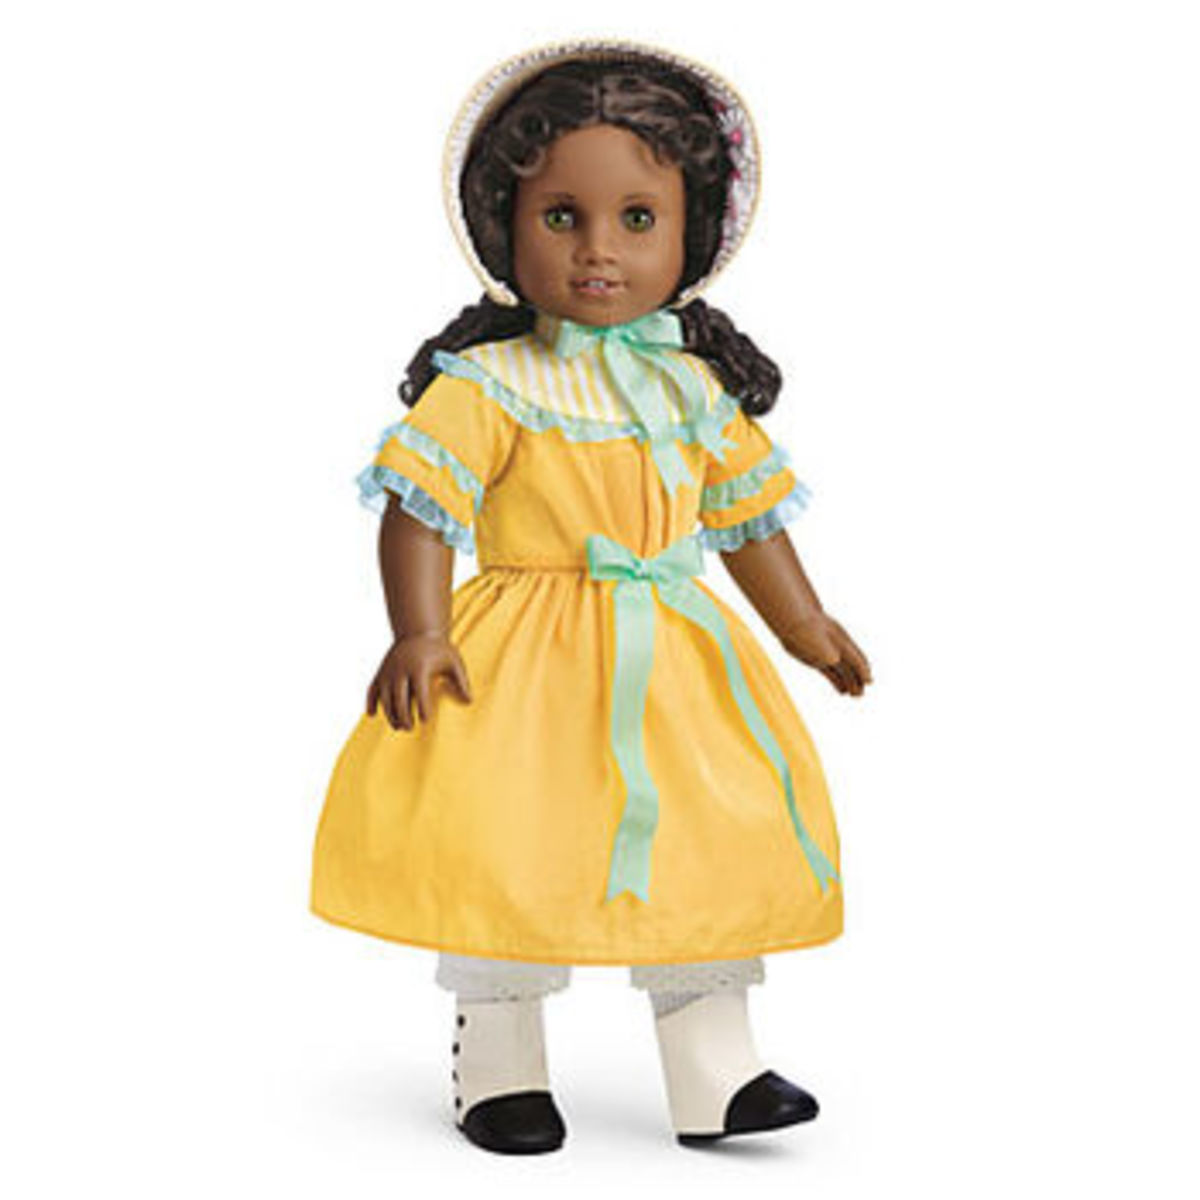 Cécile's Clothing and Accessories (An American Girl Collector's